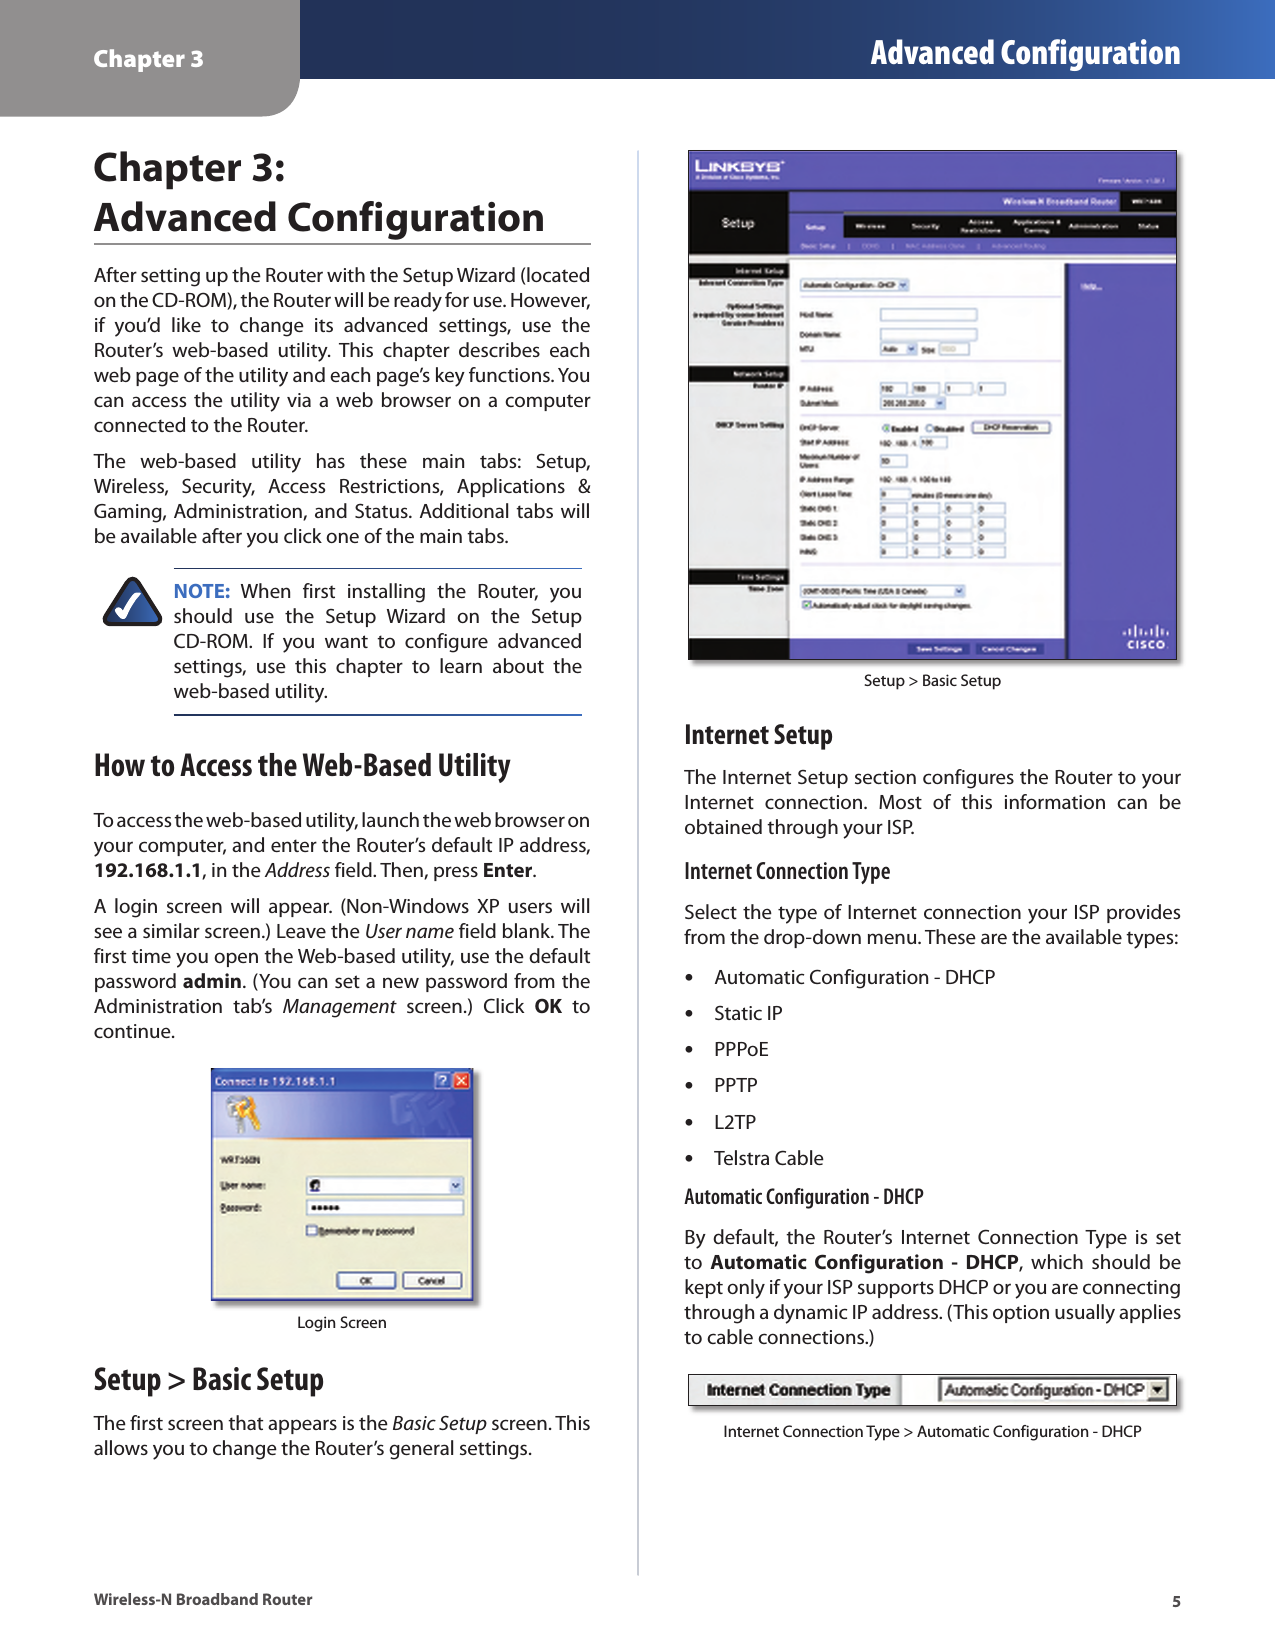 Chapter 3 Advanced Configuration5Wireless-N Broadband RouterChapter 3:  Advanced ConfigurationAfter setting up the Router with the Setup Wizard (located on the CD-ROM), the Router will be ready for use. However, if  you’d  like  to  change  its  advanced  settings,  use  the Router’s  web-based  utility.  This  chapter  describes  each web page of the utility and each page’s key functions. You can access the  utility via  a  web browser  on a computer connected to the Router.The  web-based  utility  has  these  main  tabs:  Setup, Wireless,  Security,  Access  Restrictions,  Applications  &amp; Gaming, Administration, and Status. Additional tabs will be available after you click one of the main tabs.NOTE:  When  first  installing  the  Router,  you should  use  the  Setup  Wizard  on  the  Setup CD-ROM.  If  you  want  to  configure  advanced settings,  use  this  chapter  to  learn  about  the web-based utility.How to Access the Web-Based UtilityTo access the web-based utility, launch the web browser on your computer, and enter the Router’s default IP address, 192.168.1.1, in the Address field. Then, press Enter.A  login  screen  will  appear.  (Non-Windows  XP  users  will see a similar screen.) Leave the User name field blank. The first time you open the Web-based utility, use the default password admin. (You can set a new password from the Administration  tab’s  Management  screen.)  Click  OK  to continue.Login ScreenSetup &gt; Basic SetupThe first screen that appears is the Basic Setup screen. This allows you to change the Router’s general settings. Setup &gt; Basic SetupInternet SetupThe Internet Setup section configures the Router to your Internet  connection.  Most  of  this  information  can  be obtained through your ISP.Internet Connection TypeSelect the type of Internet connection your ISP provides from the drop-down menu. These are the available types:Automatic Configuration - DHCPStatic IPPPPoEPPTPL2TPTelstra CableAutomatic Configuration - DHCPBy  default,  the  Router’s  Internet  Connection Type  is  set to  Automatic  Configuration  -  DHCP,  which  should  be kept only if your ISP supports DHCP or you are connecting through a dynamic IP address. (This option usually applies to cable connections.)Internet Connection Type &gt; Automatic Configuration - DHCP••••••